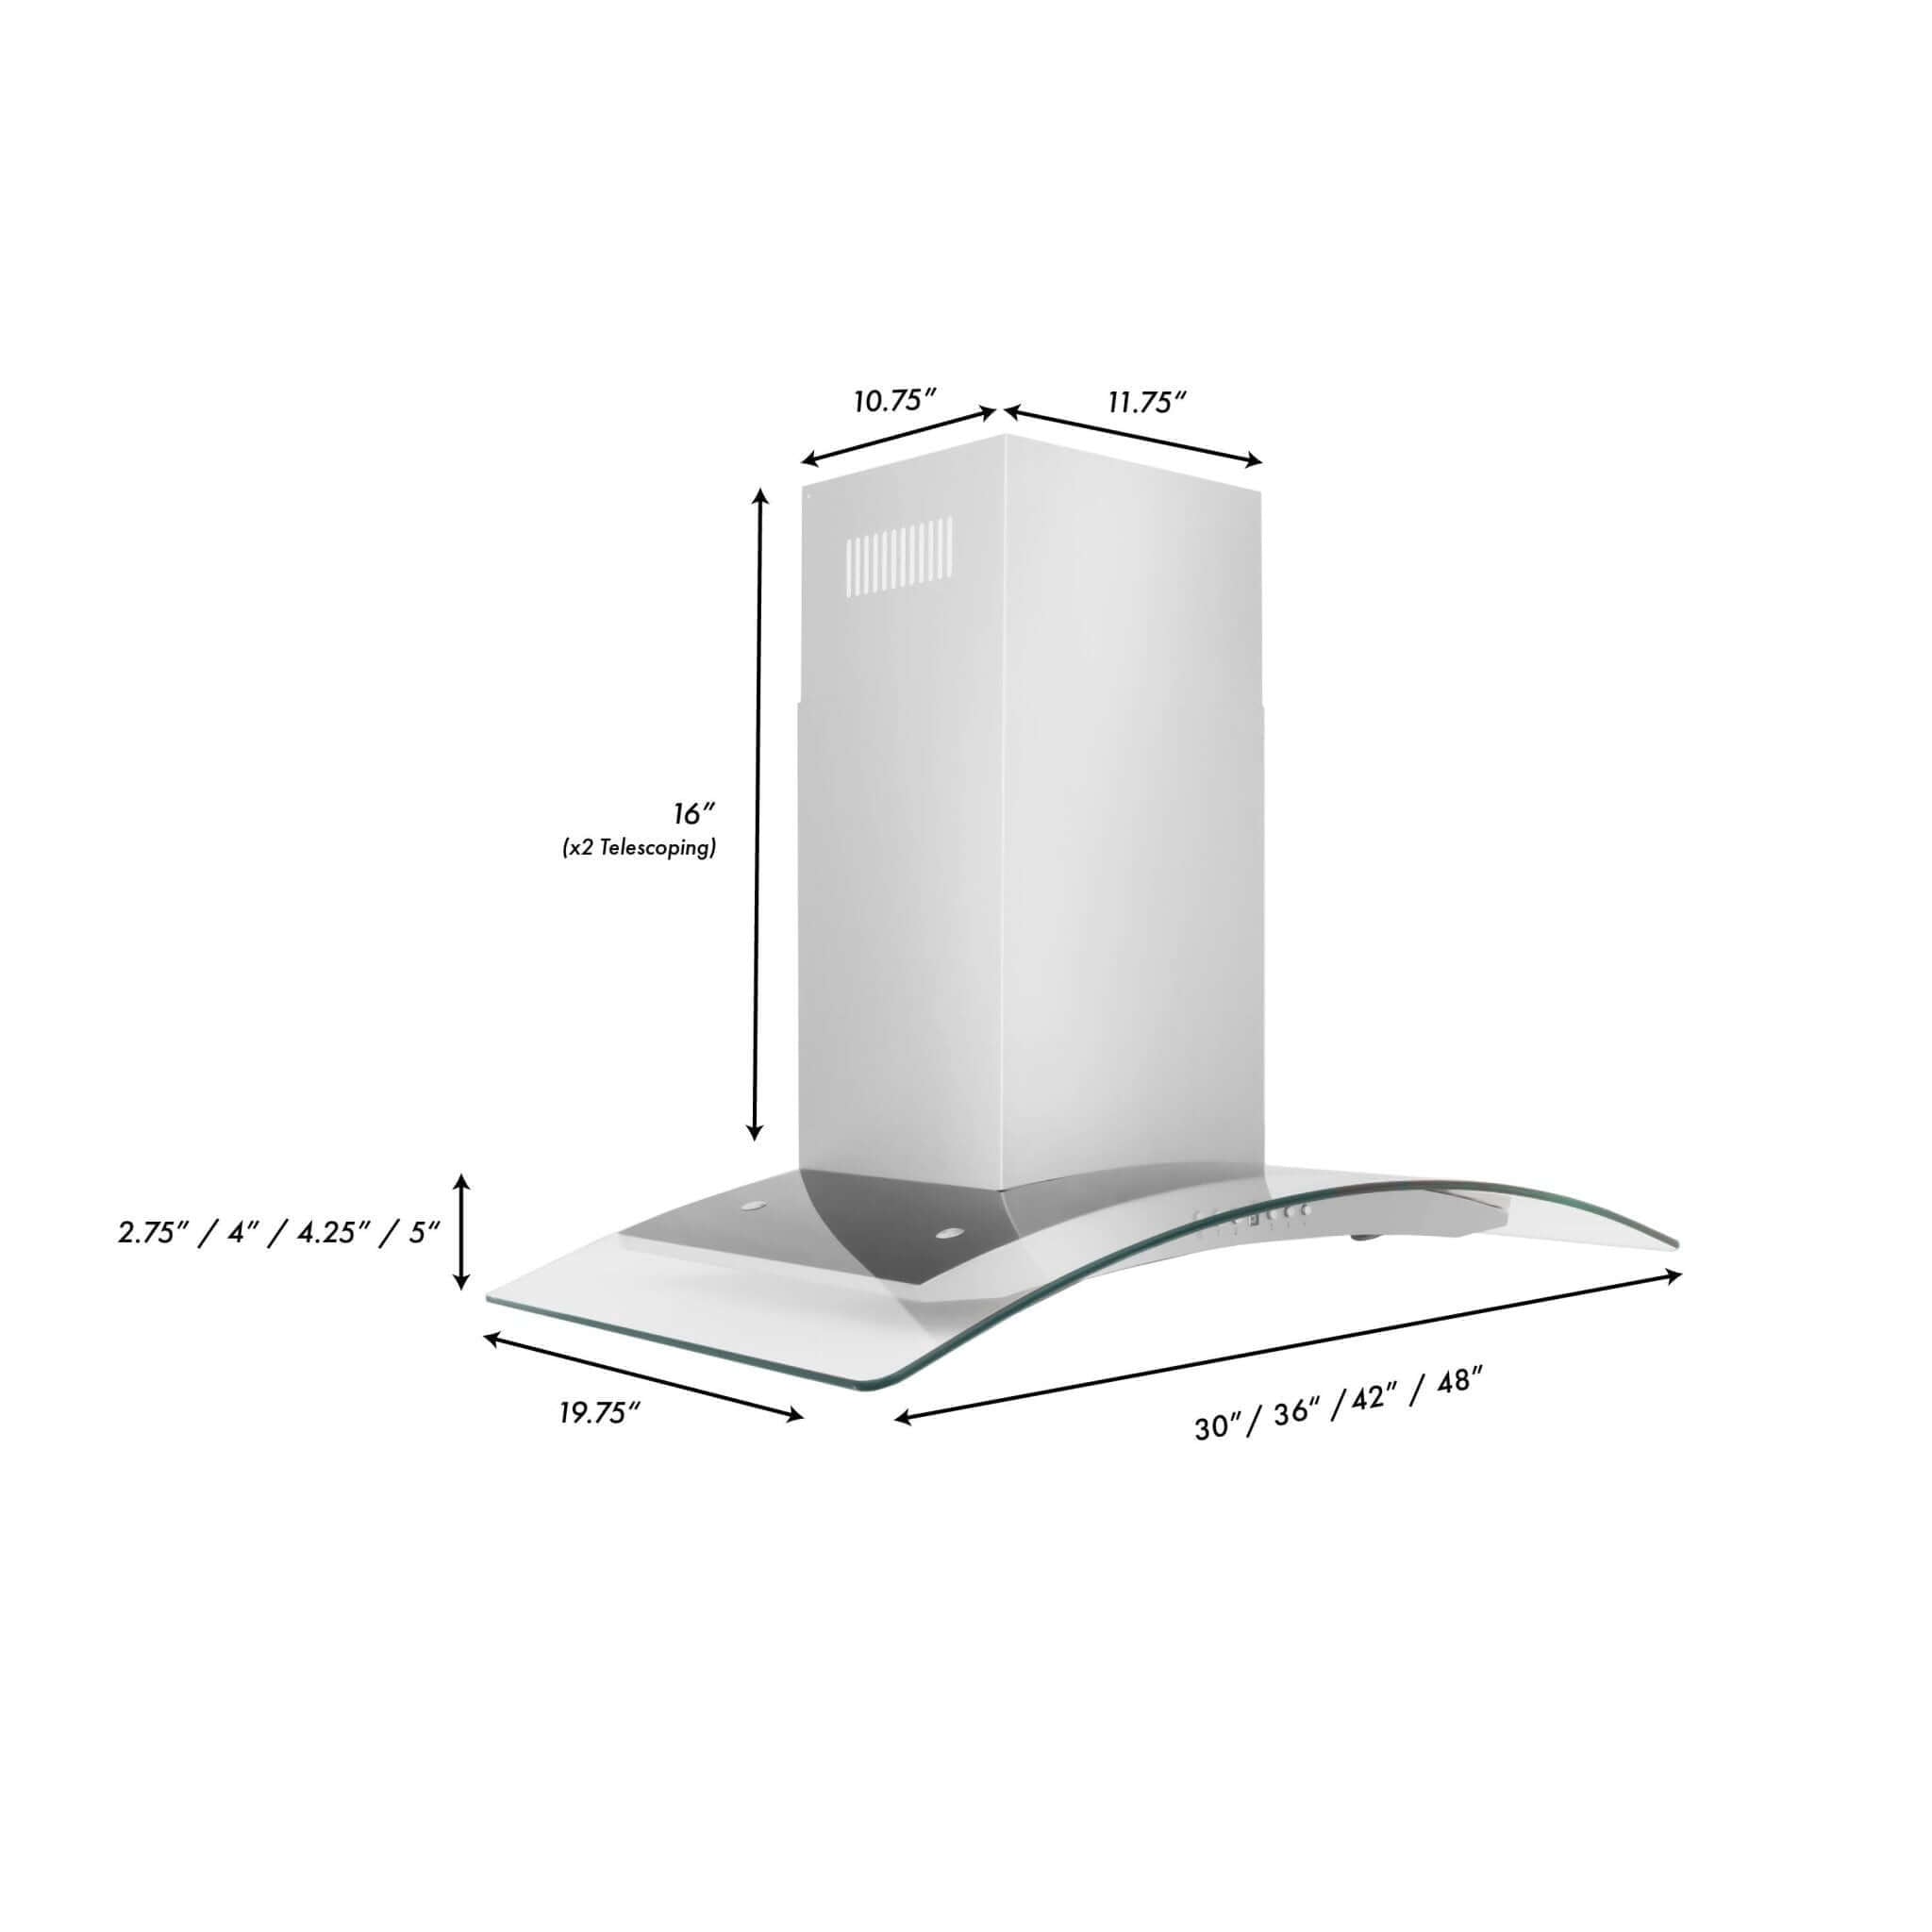 ZLINE Convertible Vent Wall Mount Range Hood in Stainless Steel & Glass (KN4) Dimensions